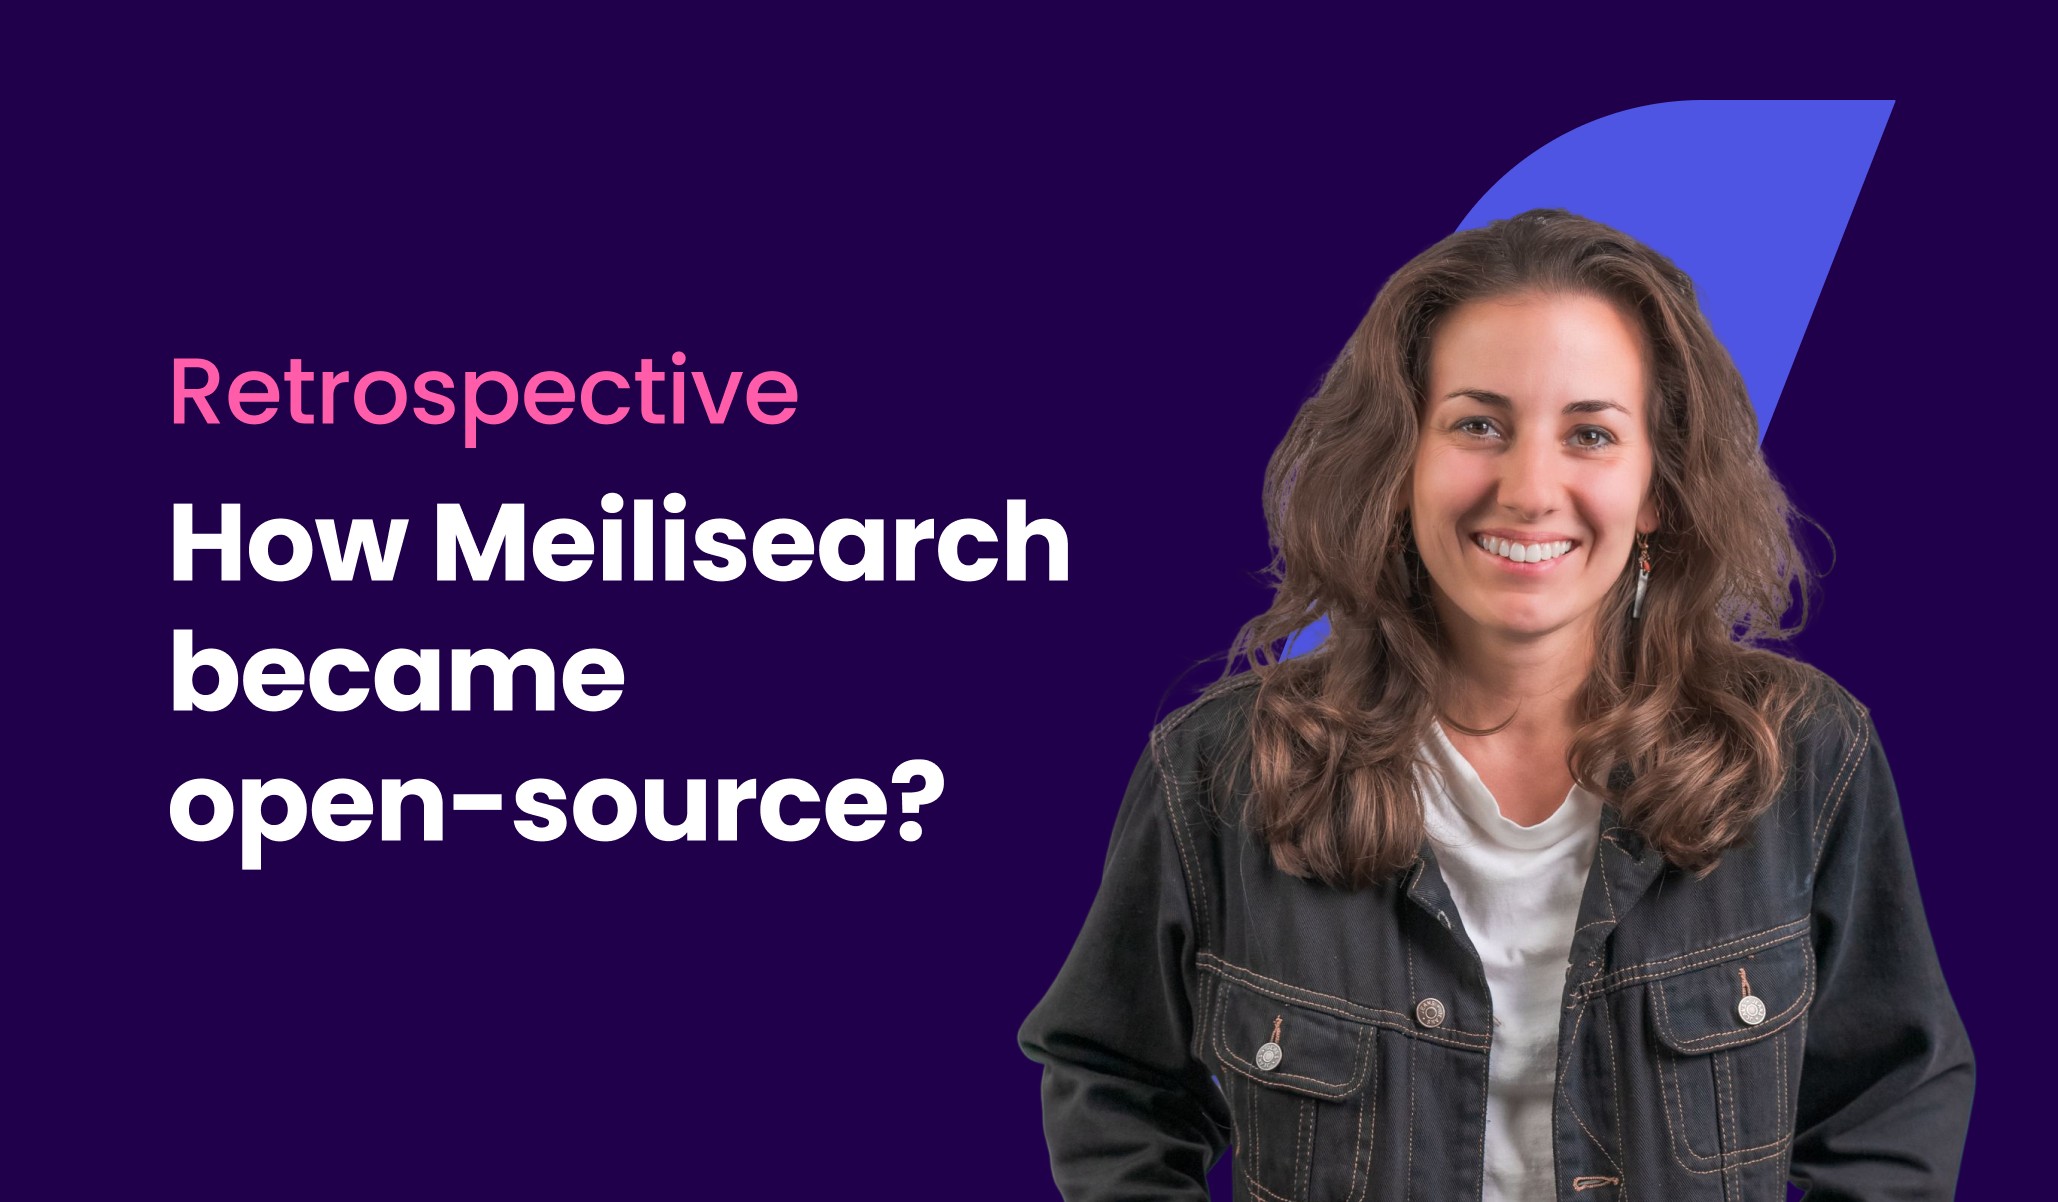 How Meilisearch became open-source: a retrospective